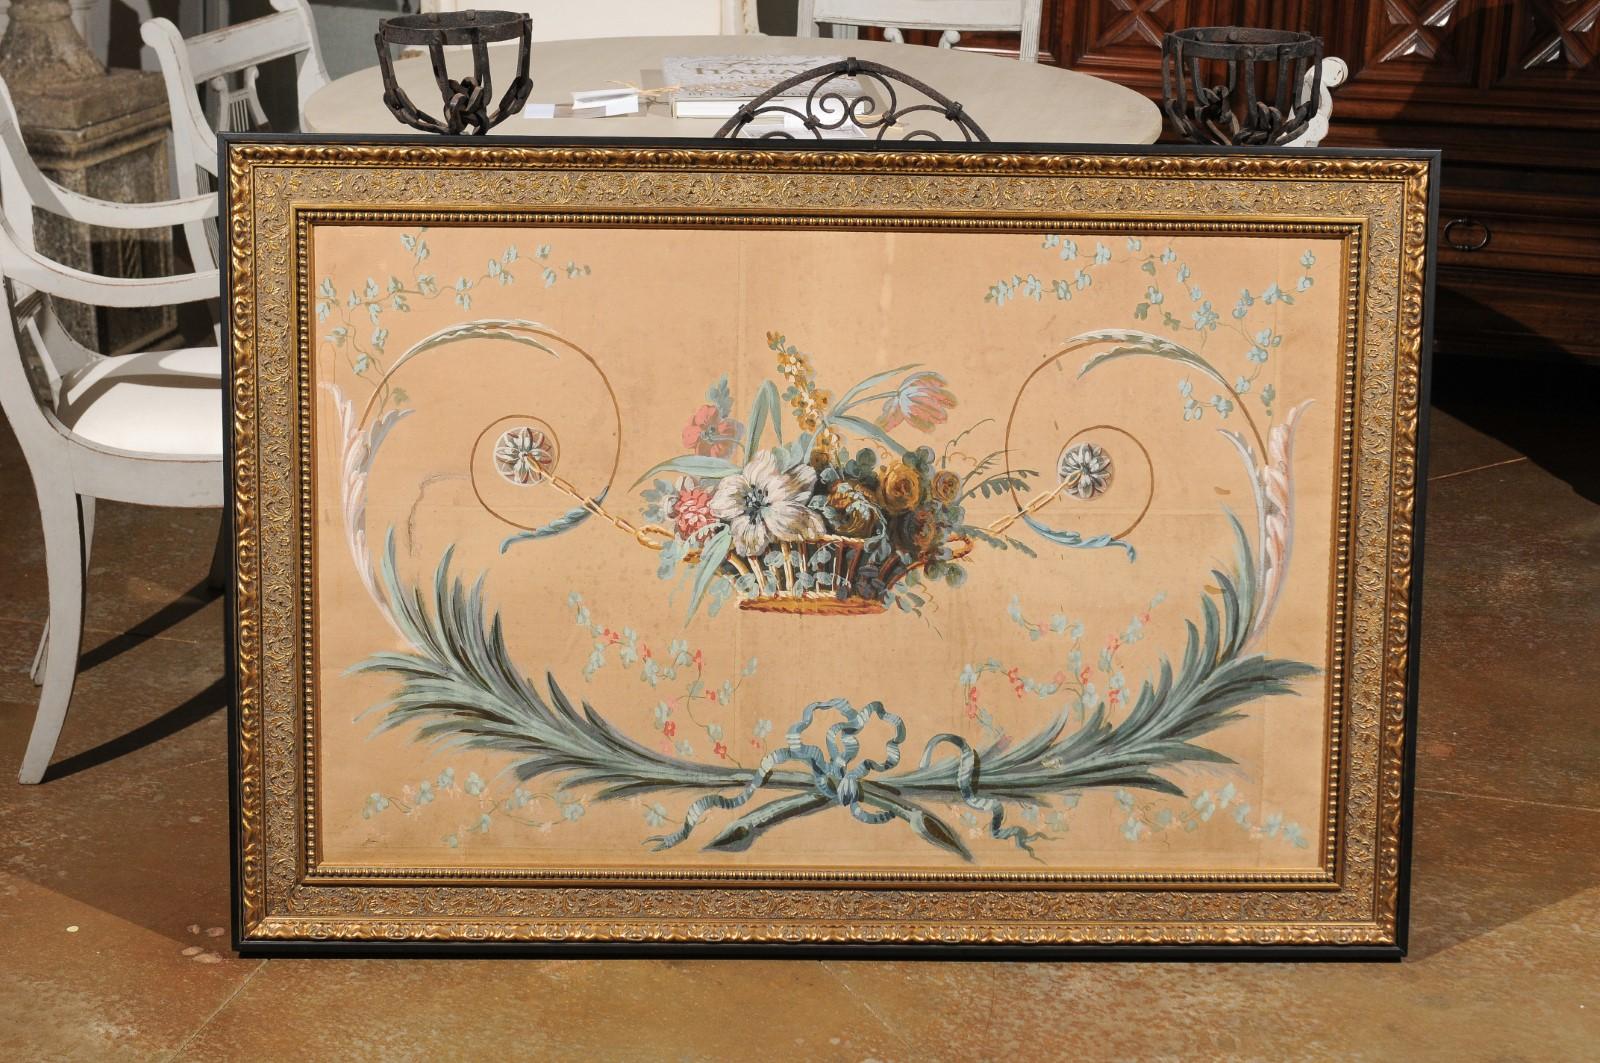 A French Directoire period framed painted panel from the late 18th century, with floral motifs. Born in France during the later years of the 18th century, this exquisite decorative panel features a lovely bouquet of flowers, displayed in a humble